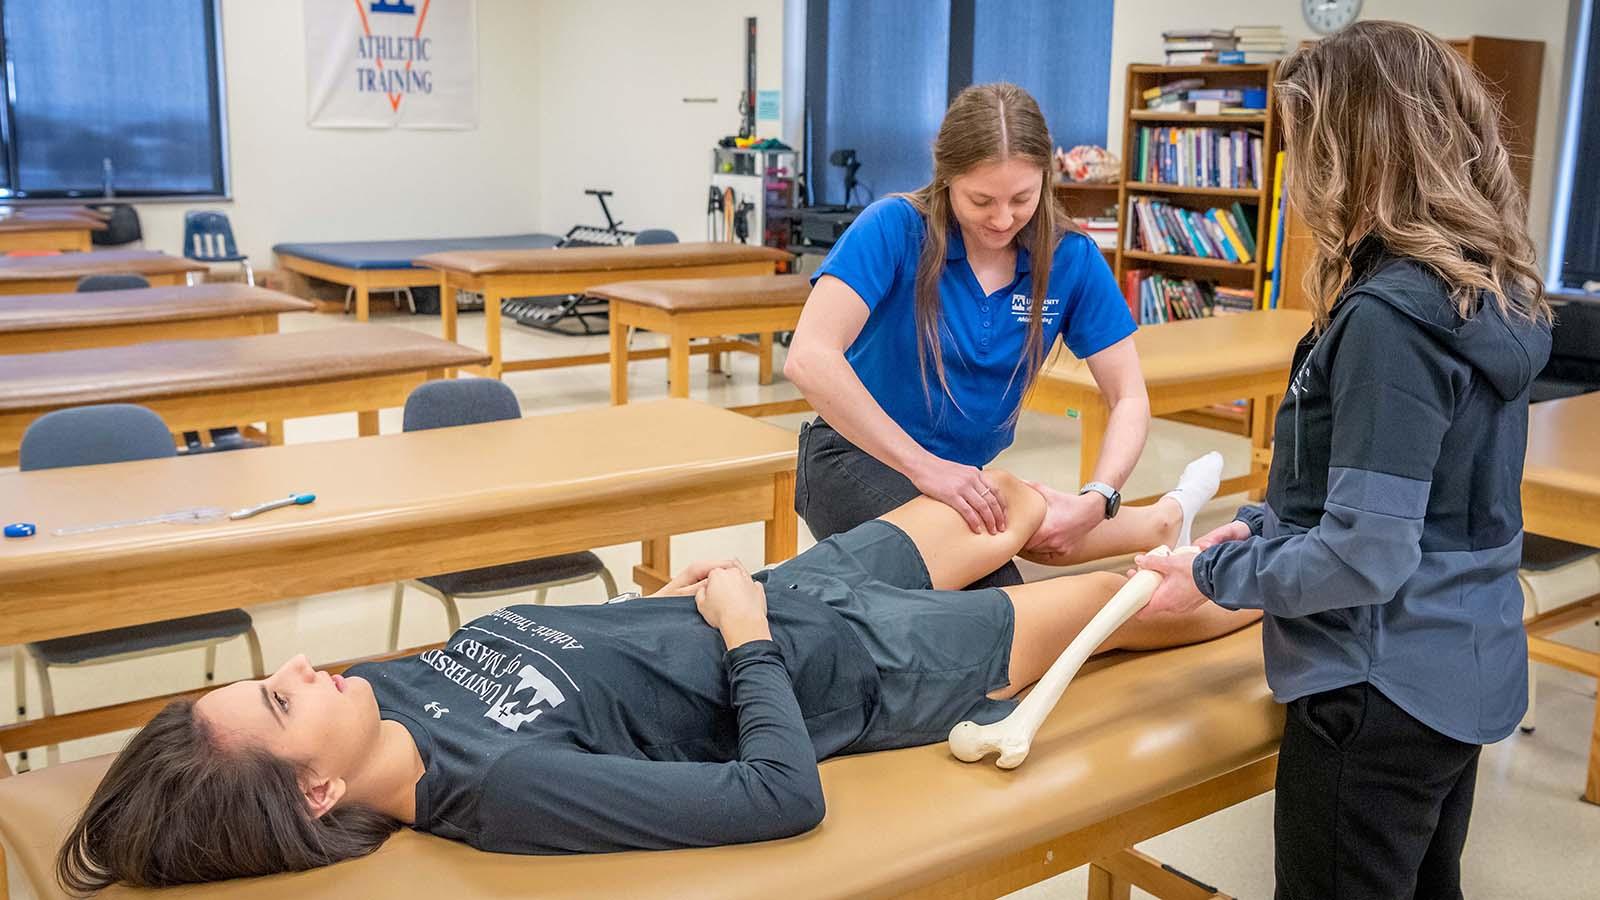 Athletic training student completing an assessment on athlete’s knee while instructor is watching